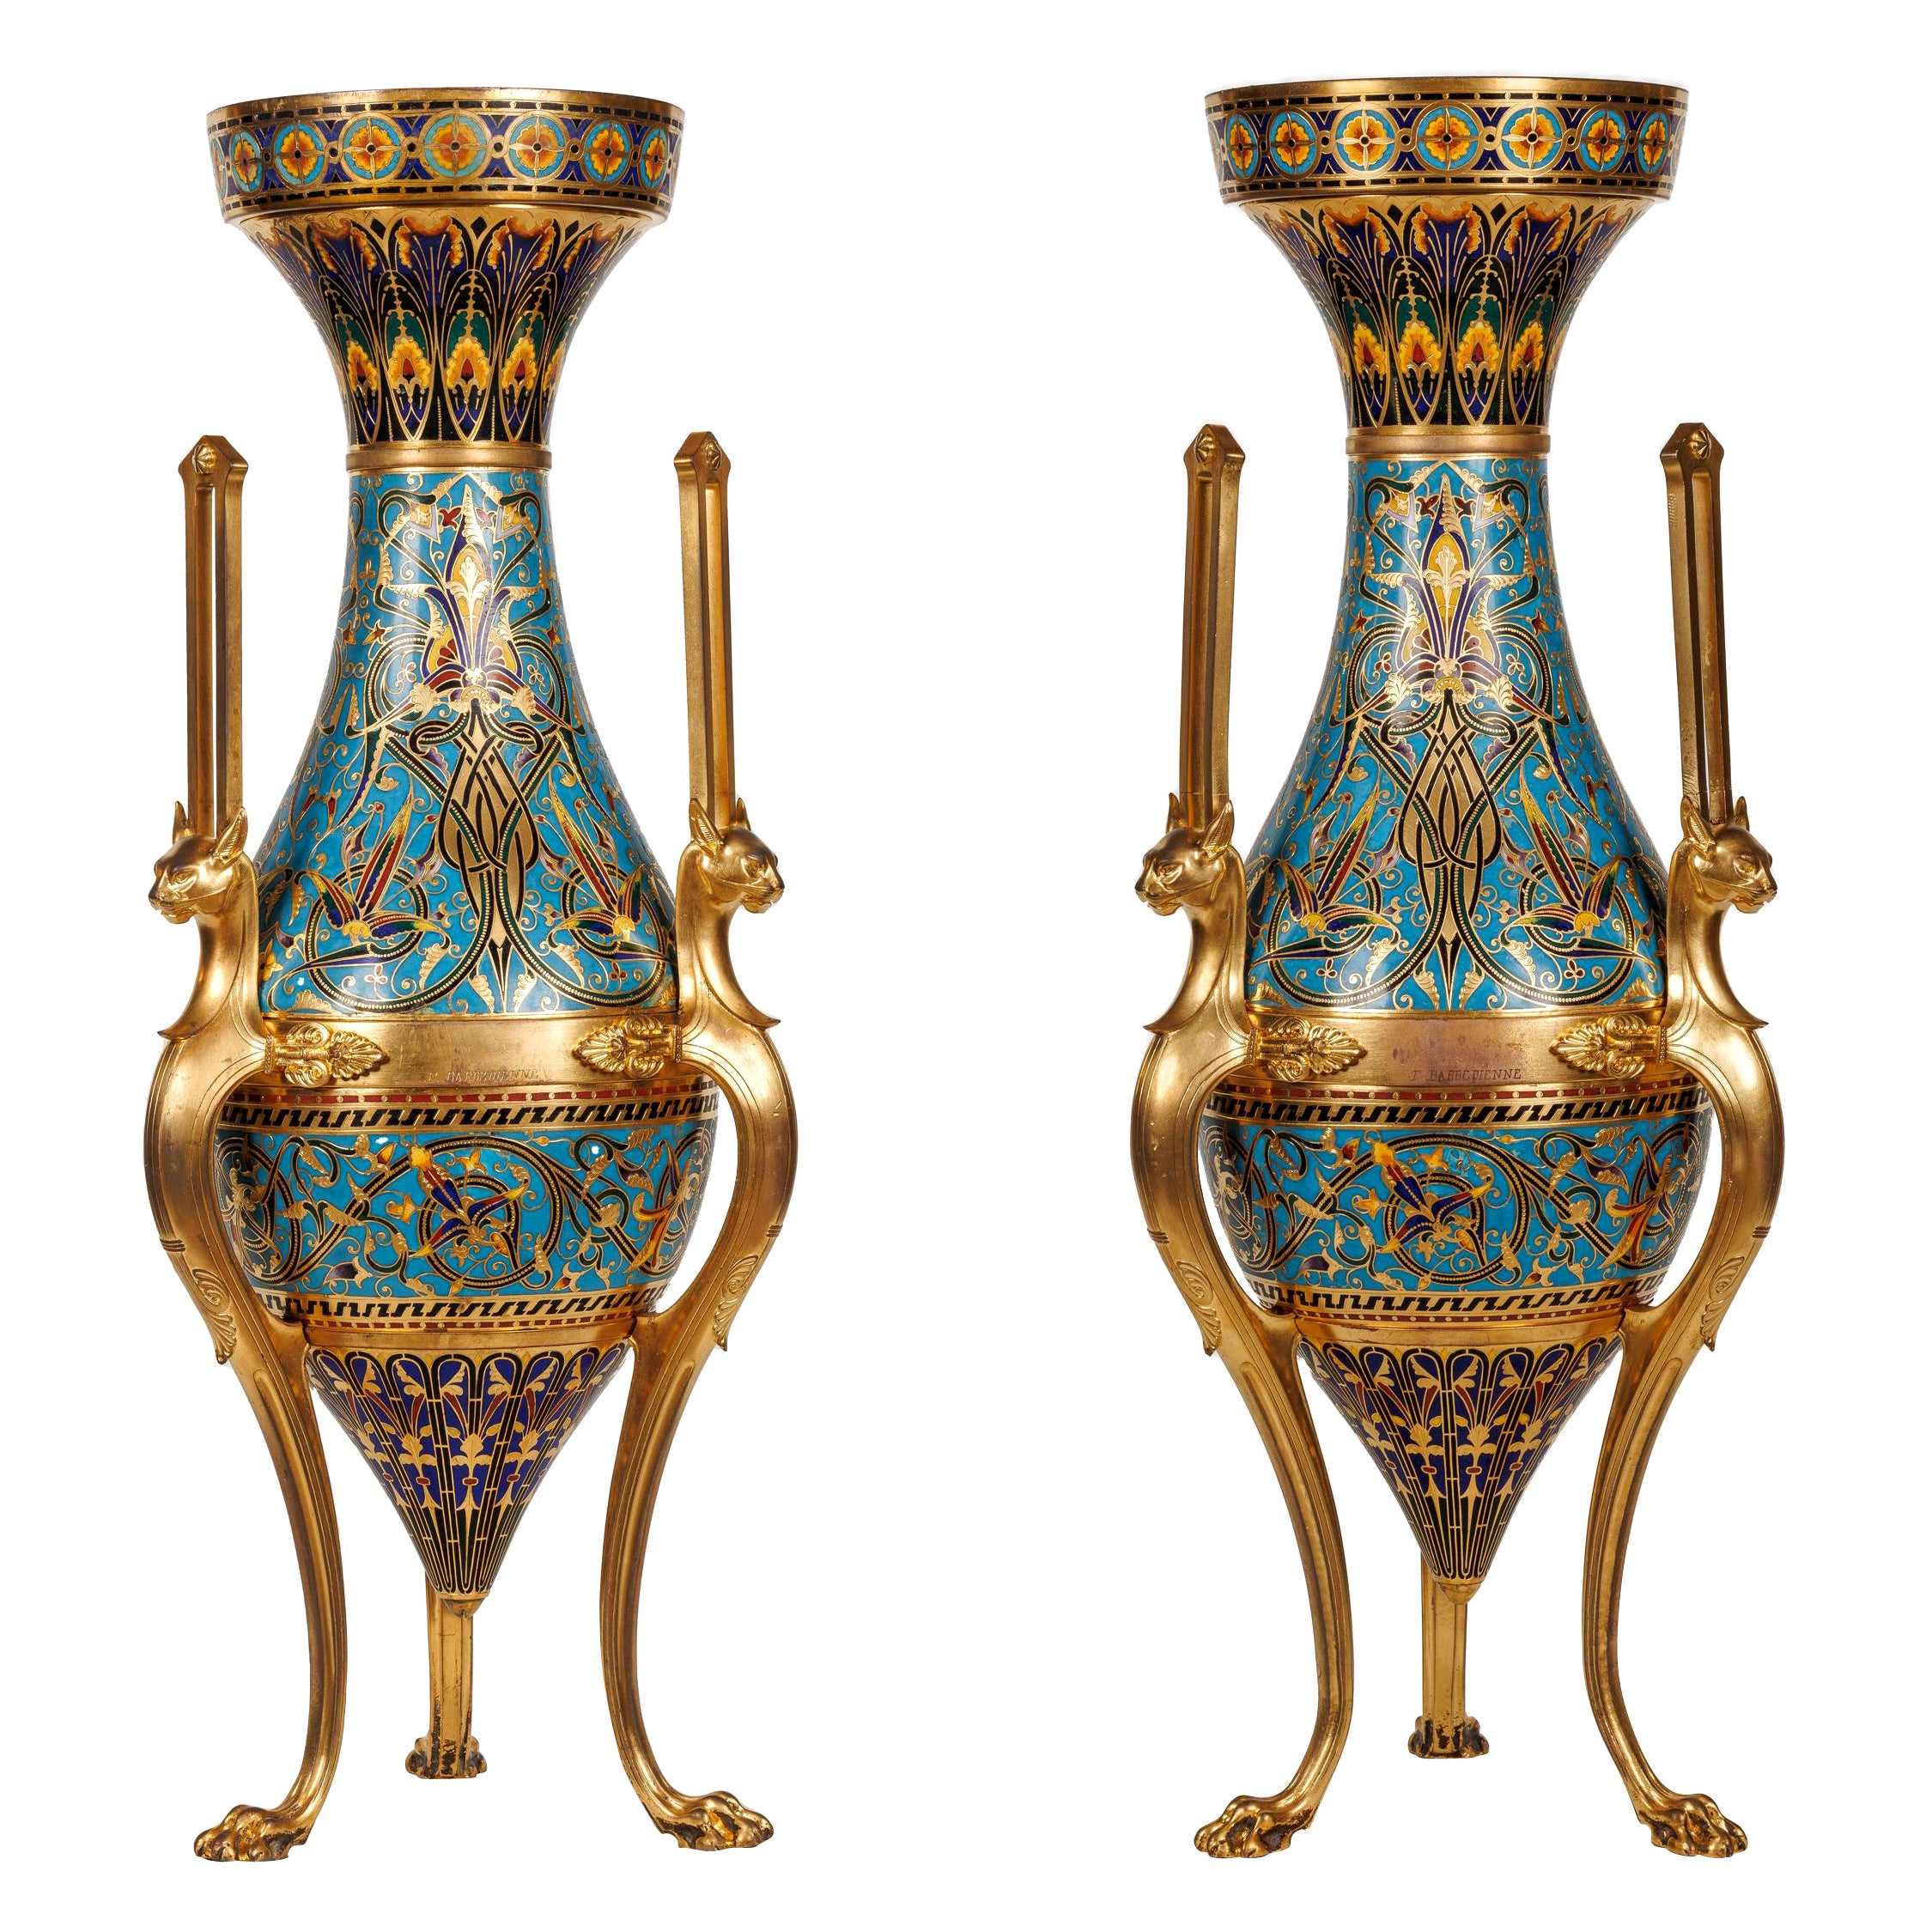 Exceptional Pair of Vases by Louis Constant Sevin and Ferdinand Barbedienne